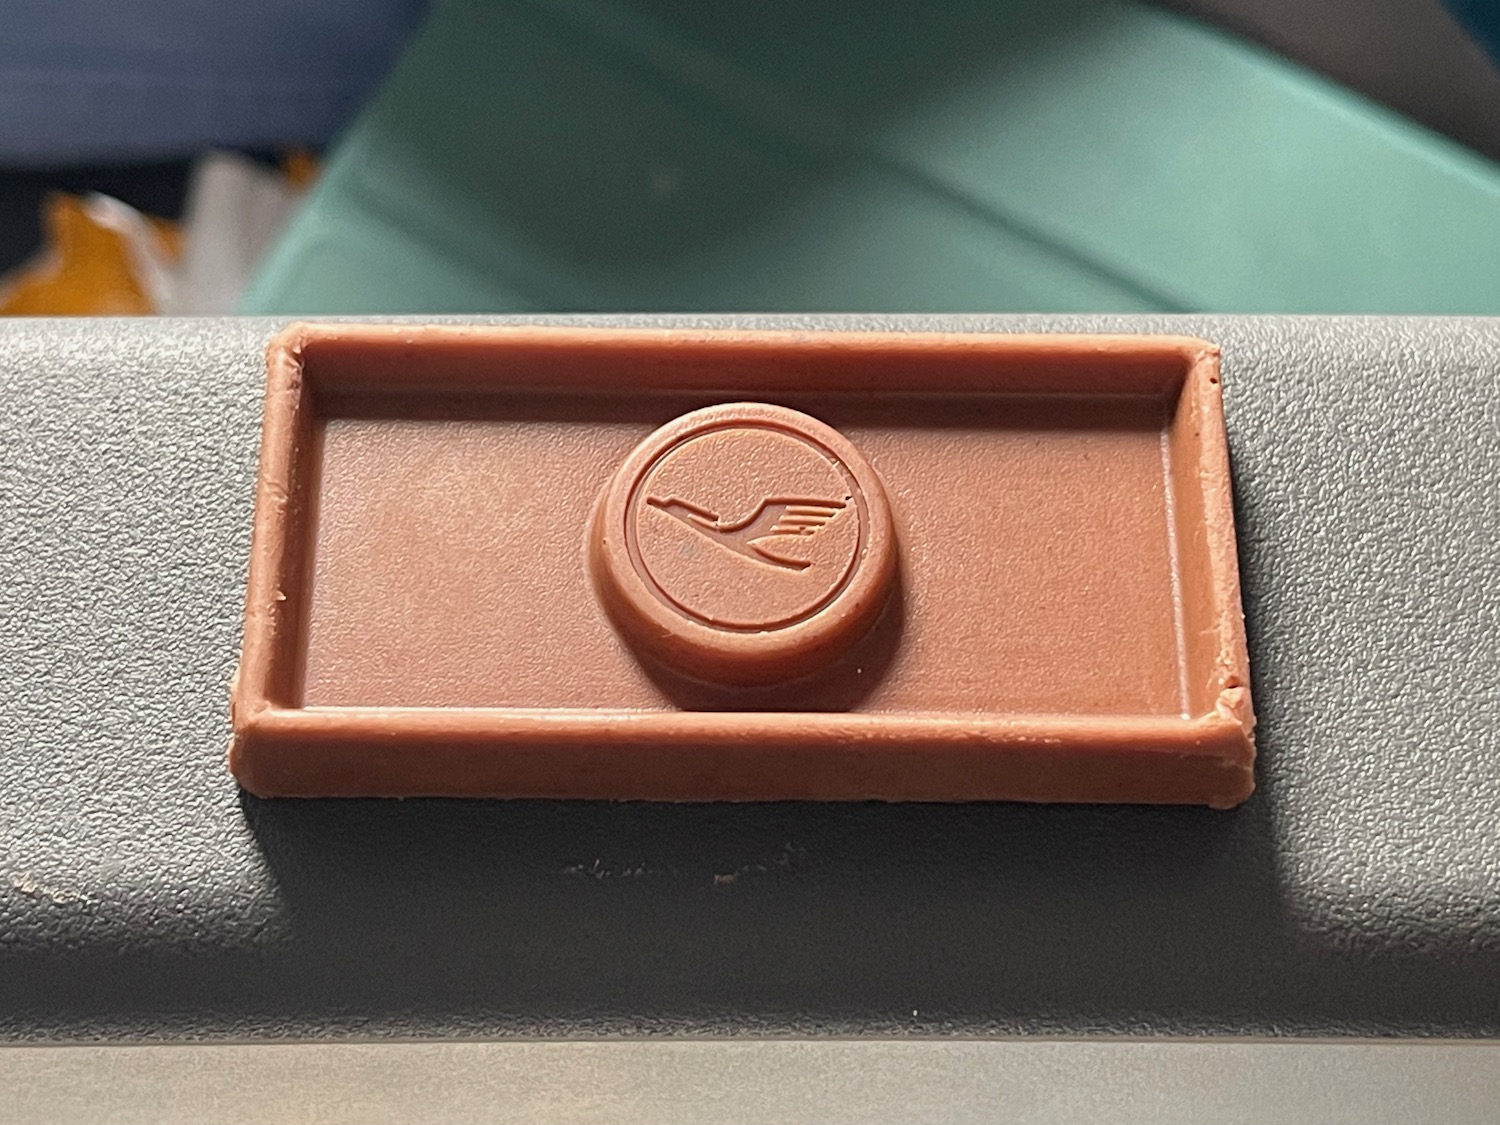 a brown rectangular object with a logo on it